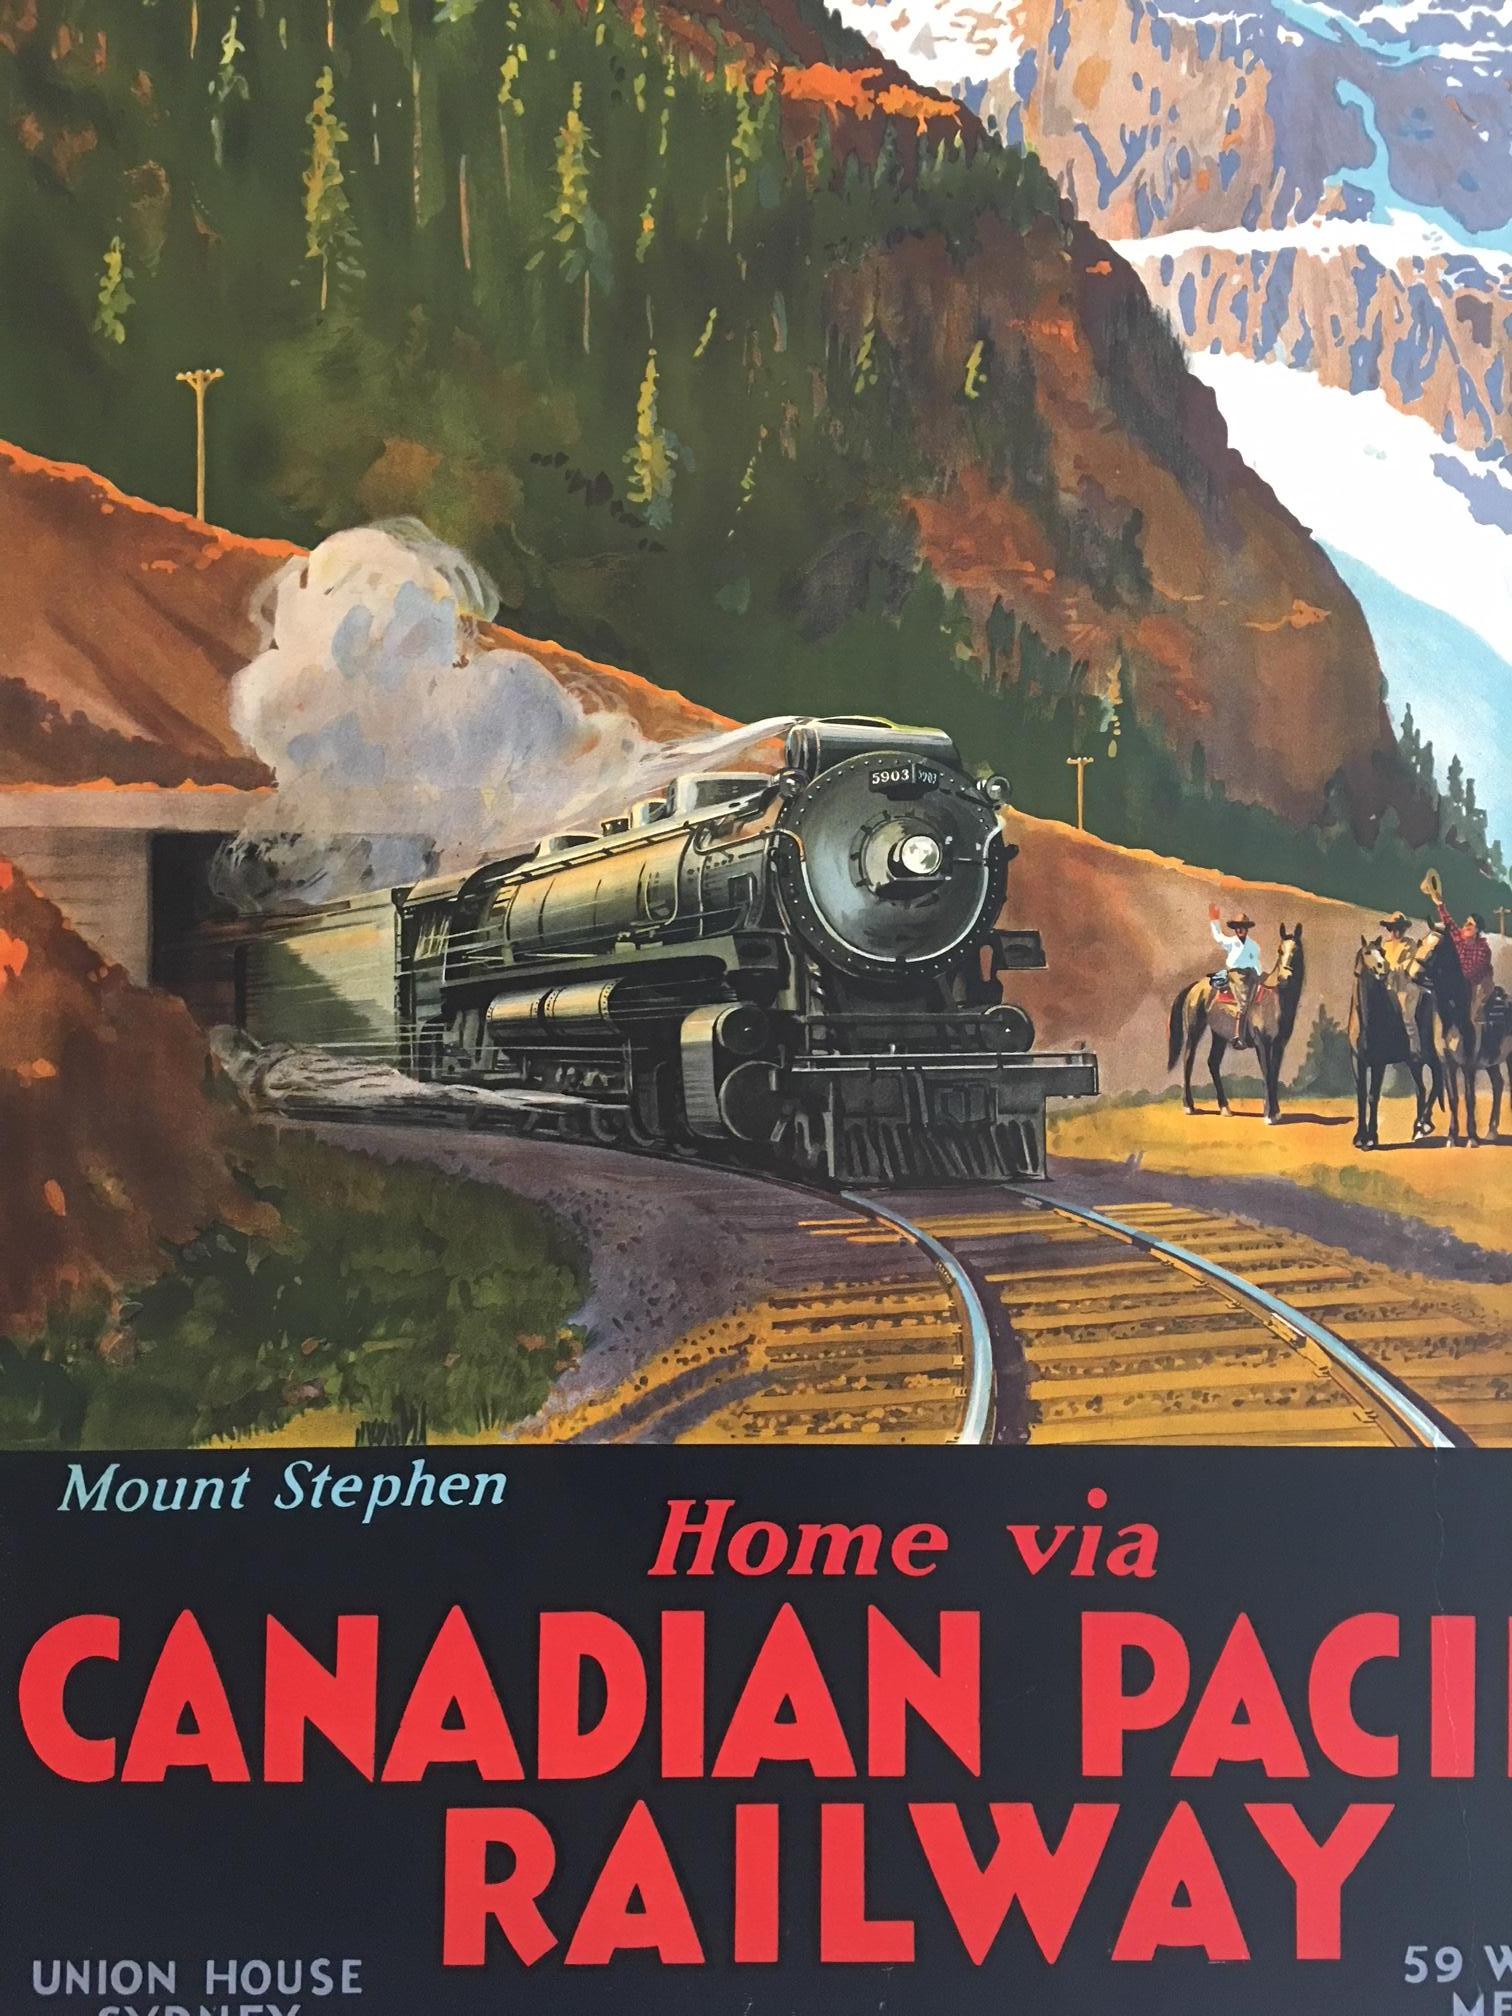 Mount Stephen Canadian Pacific Railway, by Trompf, 1930s


Artist: Percy Trompf

Rare poster 110 x 75 cm

Percival Albert (Percy) Trompf (1902-1964), was a commercial artist born on 30 May 1902 at Beaufort, Victoria, Australia. His posters